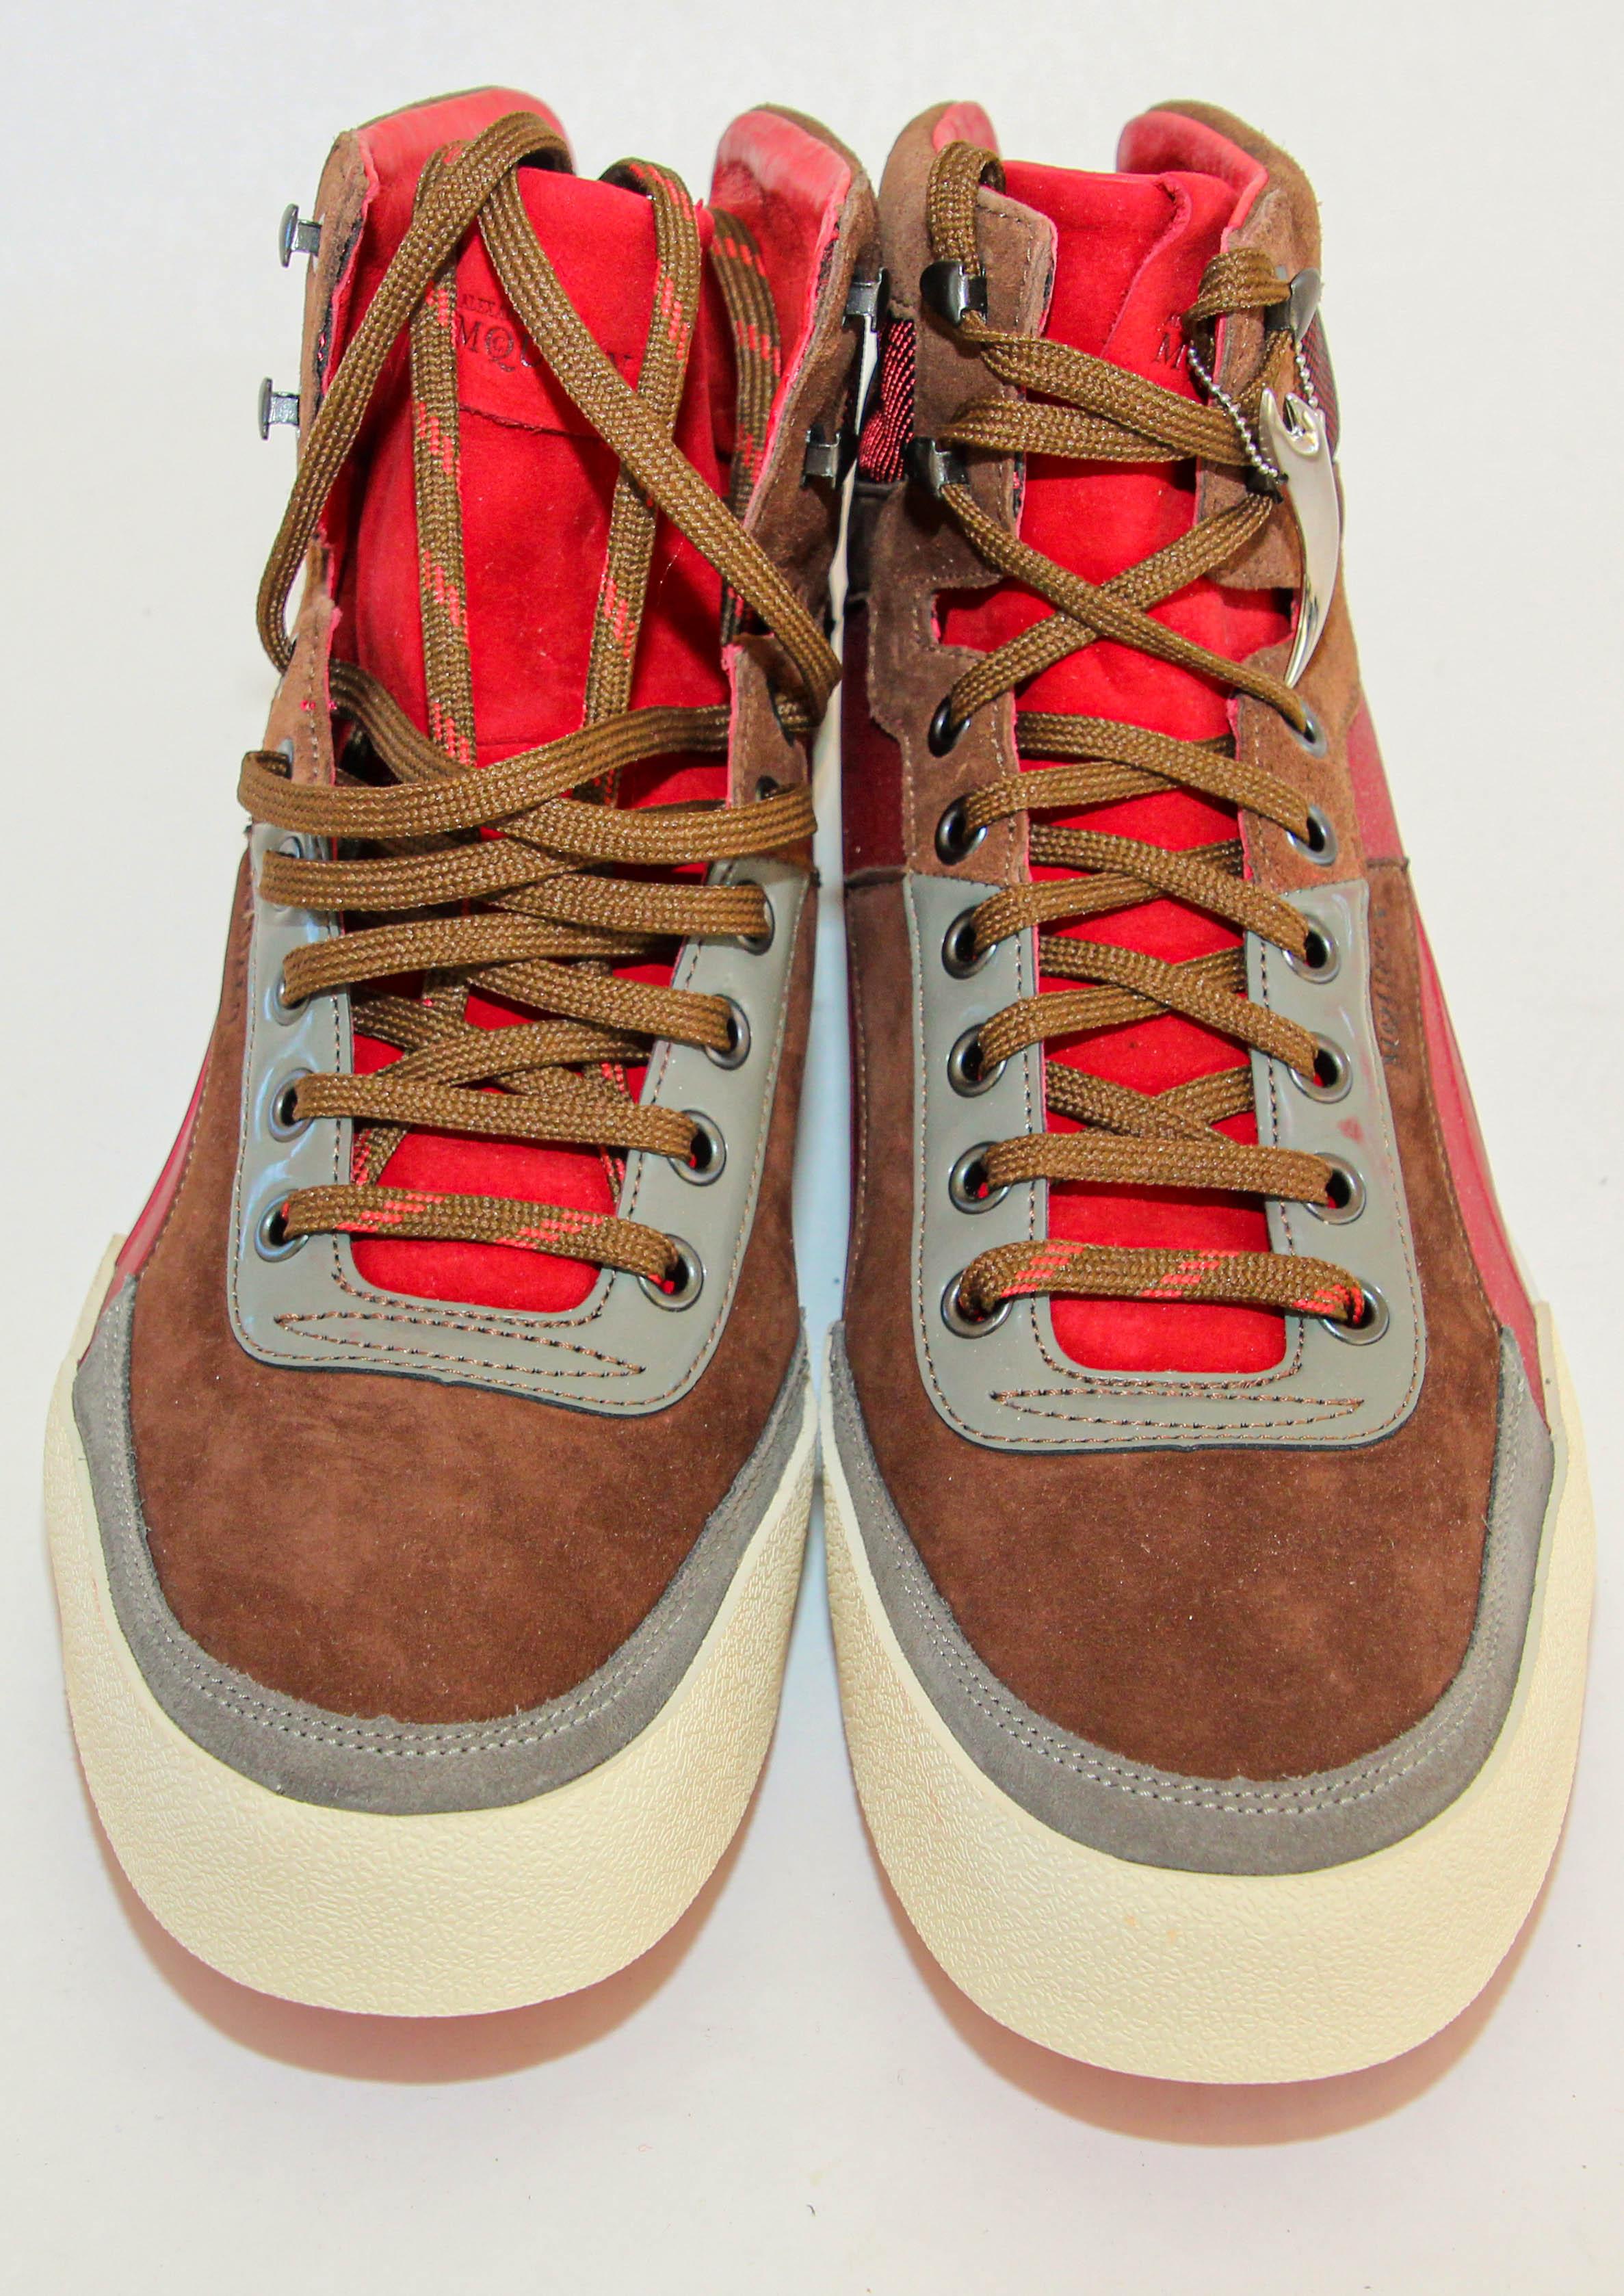 Alexander McQueen X Puma AMQ Trail Trainer Mid Top Sneakers Red Suede US 9 In Excellent Condition For Sale In North Hollywood, CA